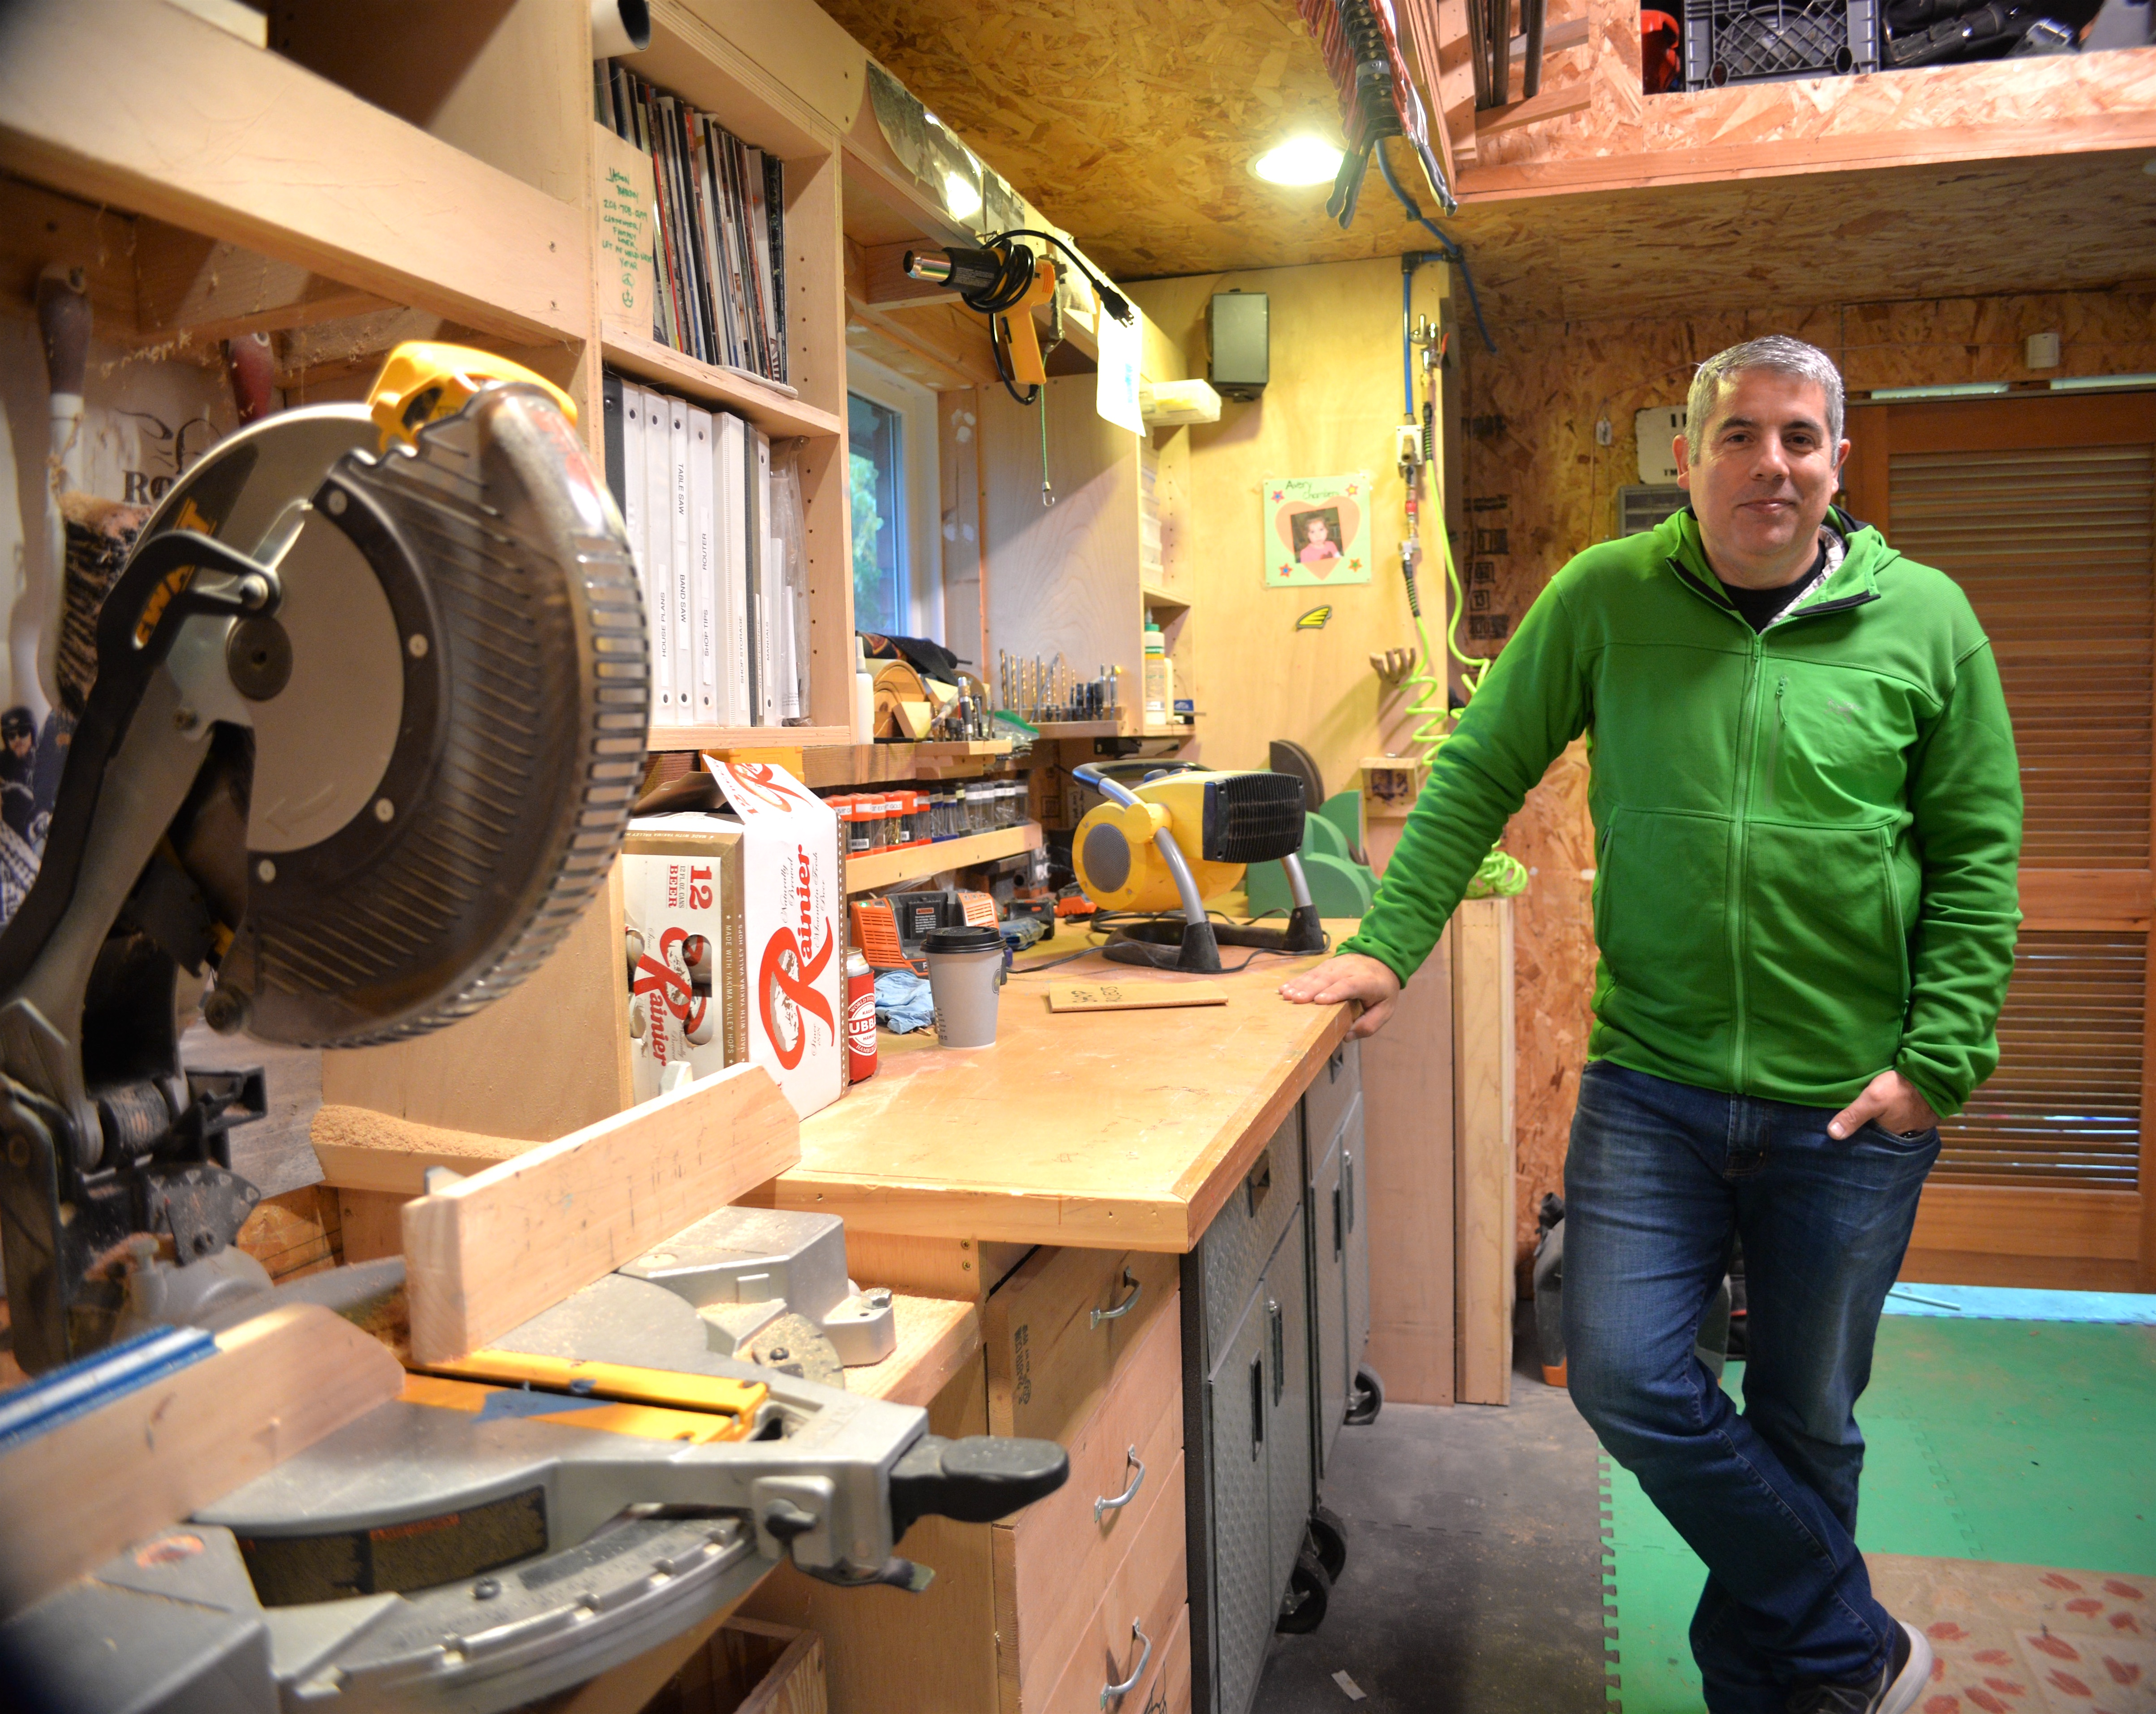 Chambers in his shop